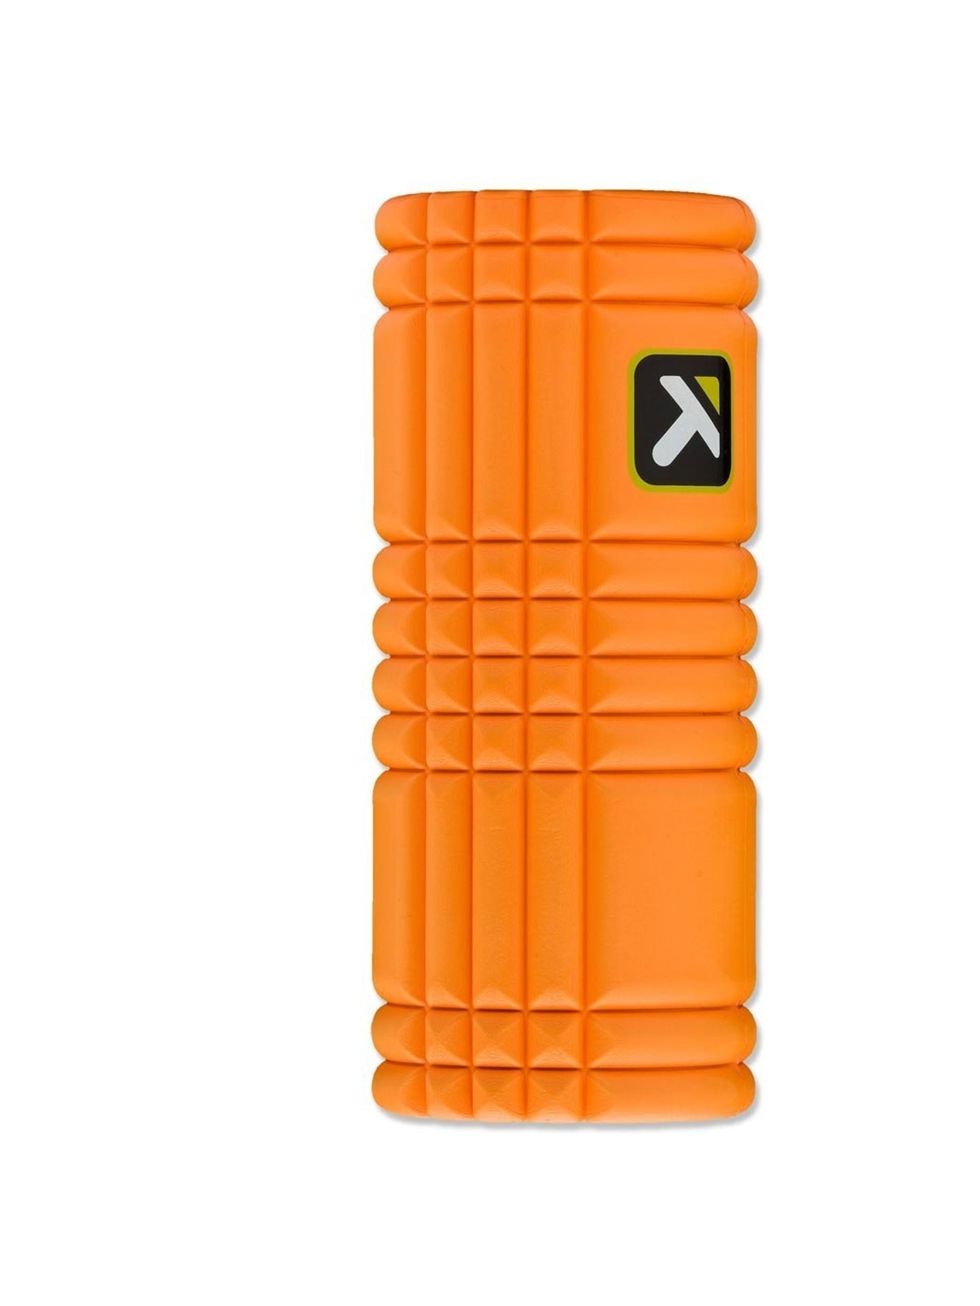 <p>Foam rollering helps to release tight muscles after working out. Known as Self-Myofascial (self massage) it allows you to manipulate your muscles so they become supple and should prevent too much aching the next day. You can also get to hard to stretch